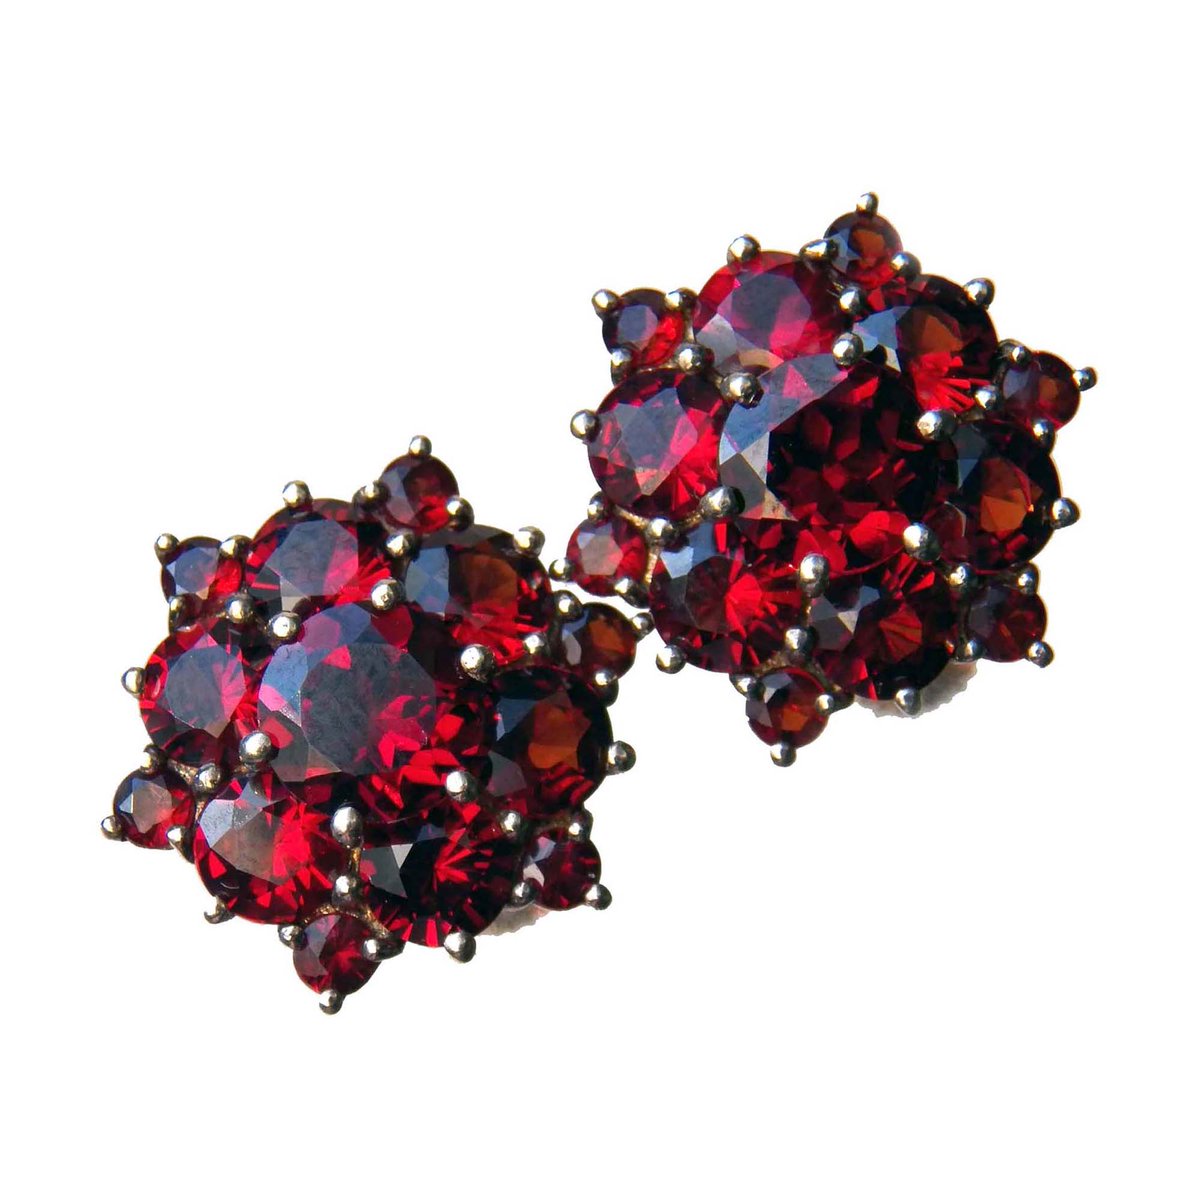 sochicfinds.com/products/victo…
Victorian Revival Pave Garnet Flower Earrings, Gilt Sterling Silver, January Birthstone Gift #VictorianRevival #GarnetEarrings, #JanuaryBirthstone